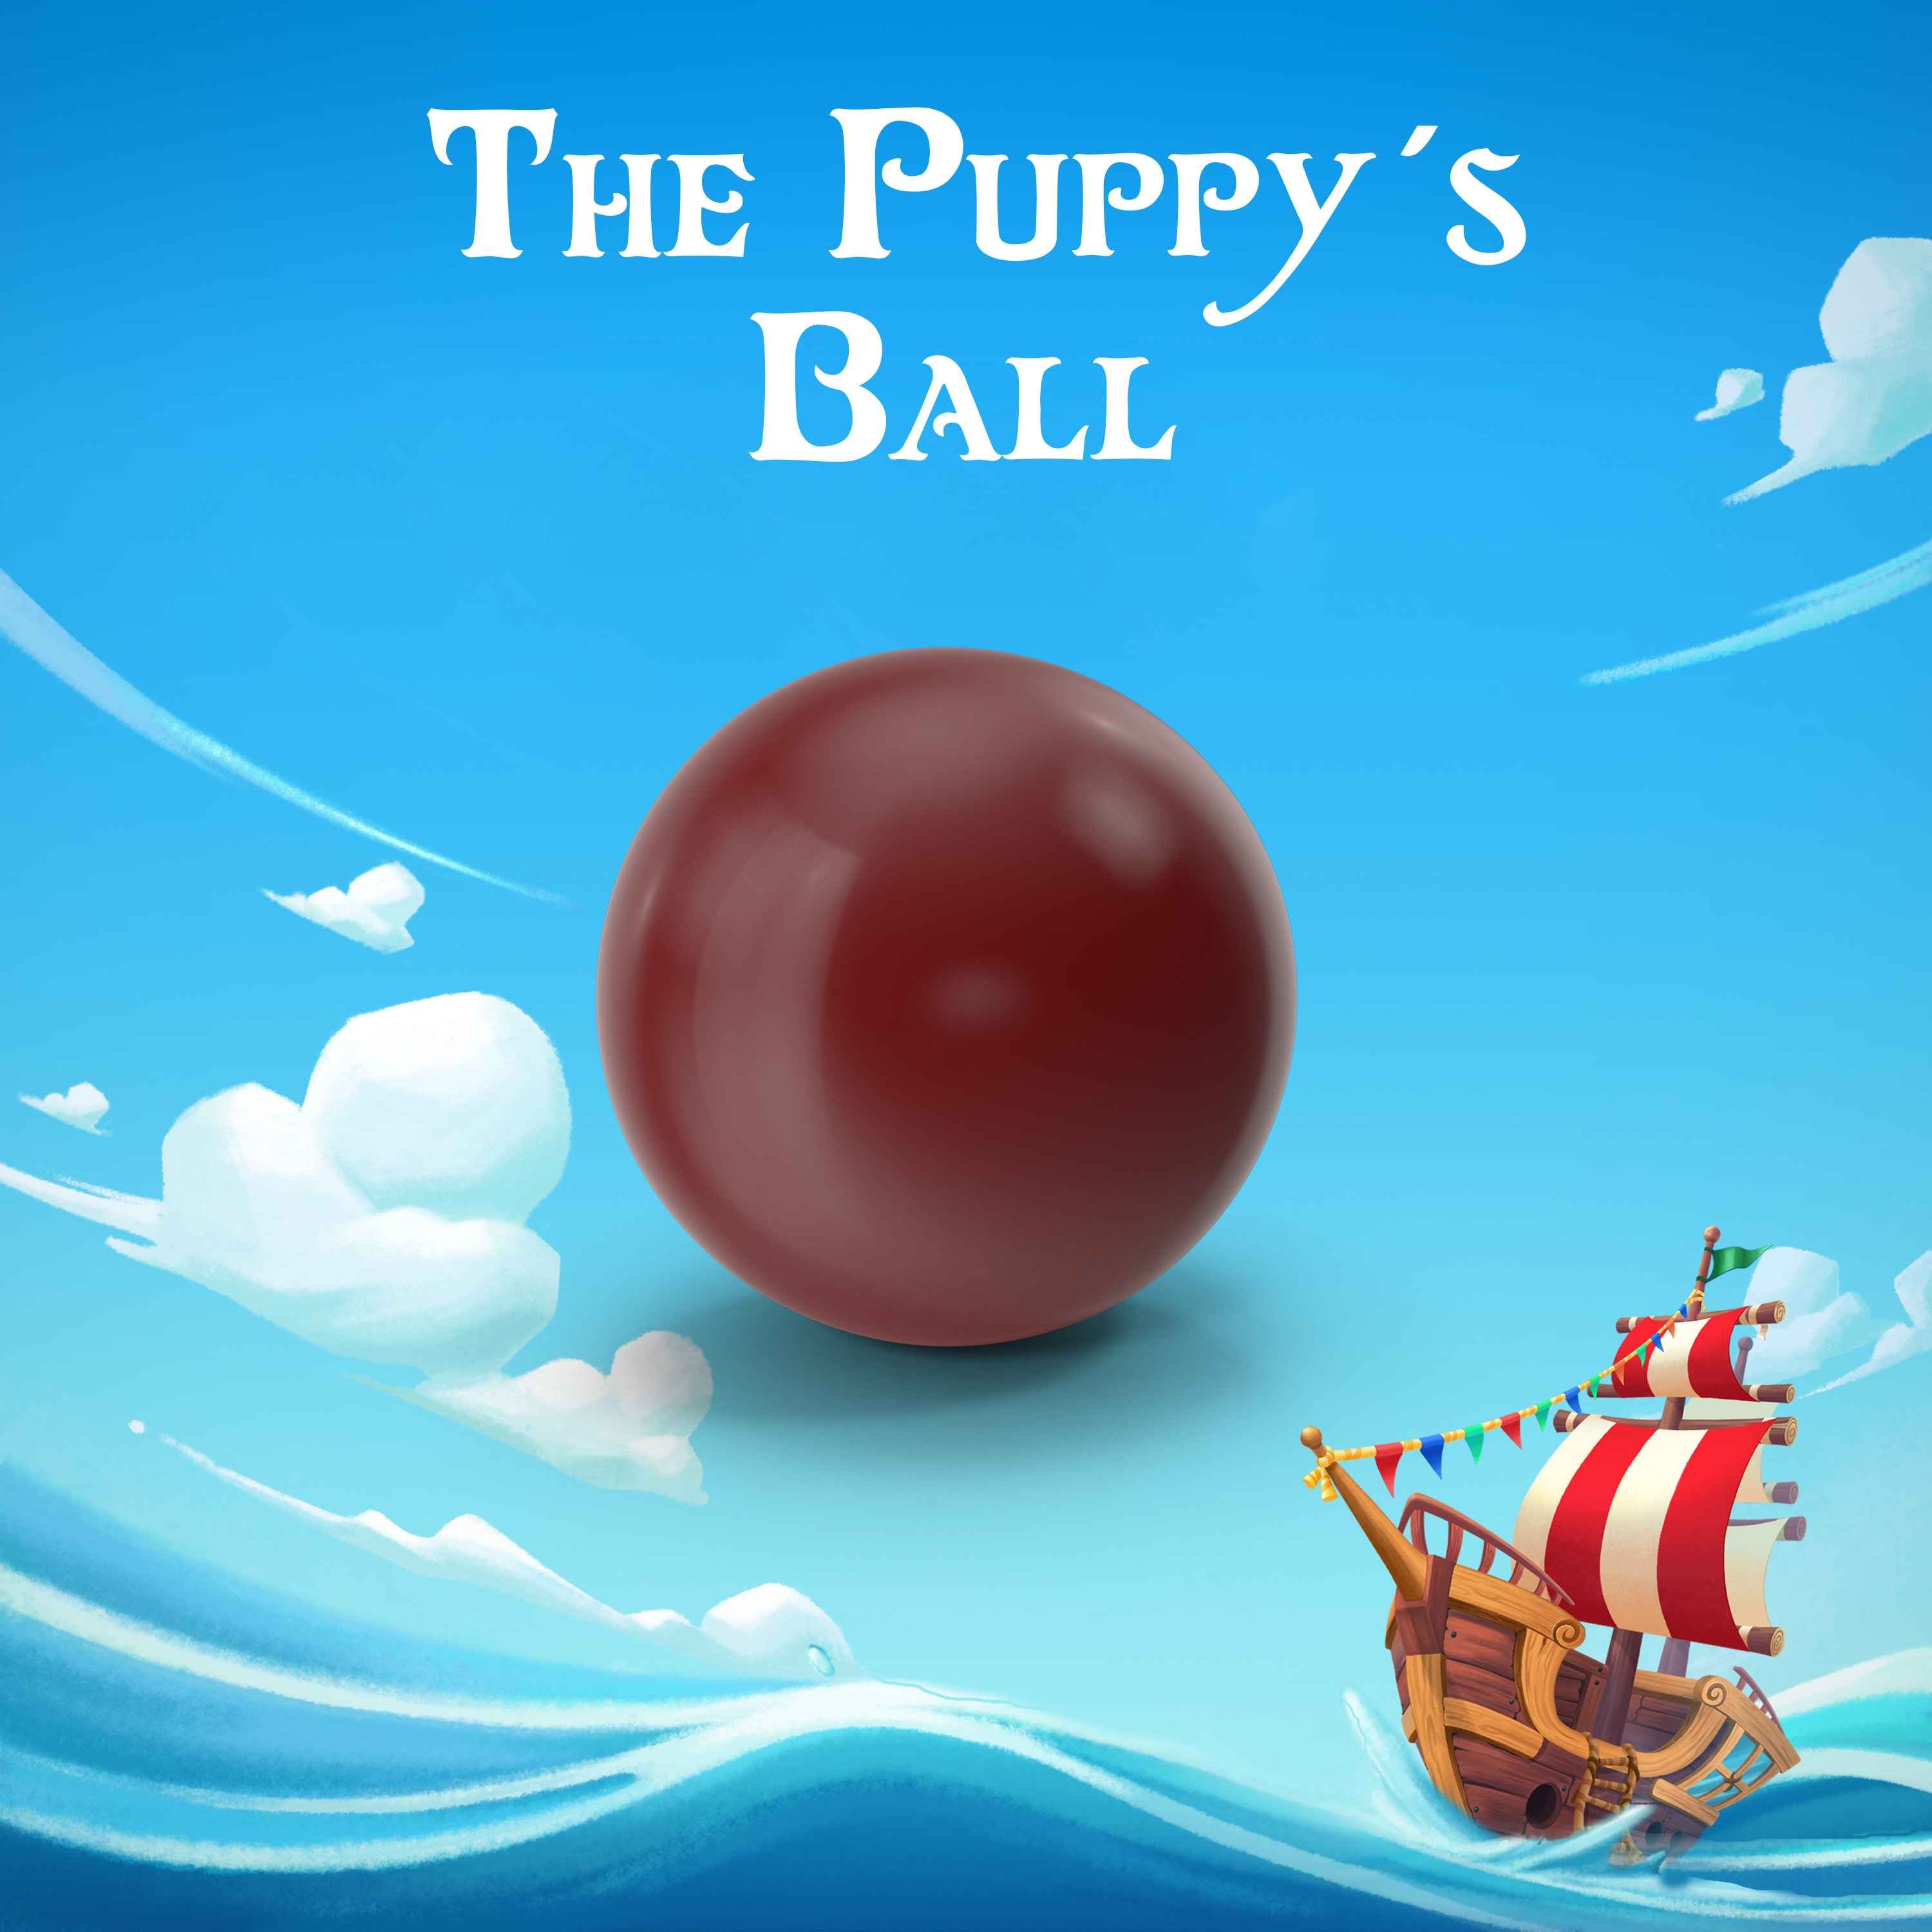 The Puppy's Ball